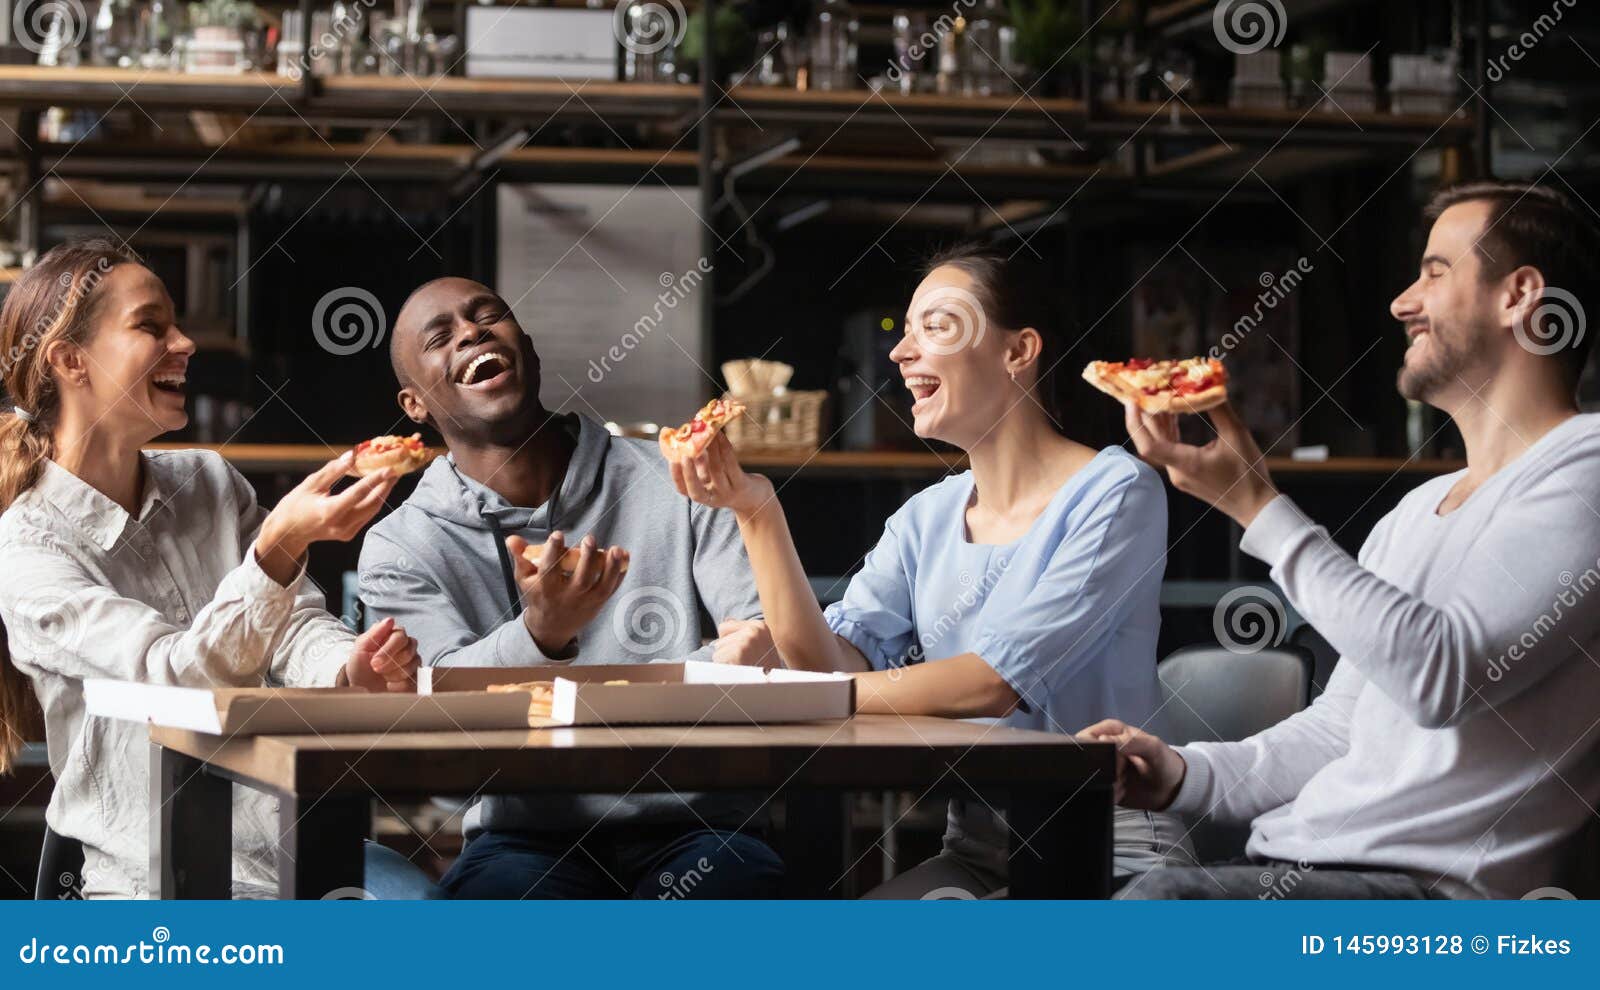 Multiracial Friends Laughing Eating Pizza Gathered